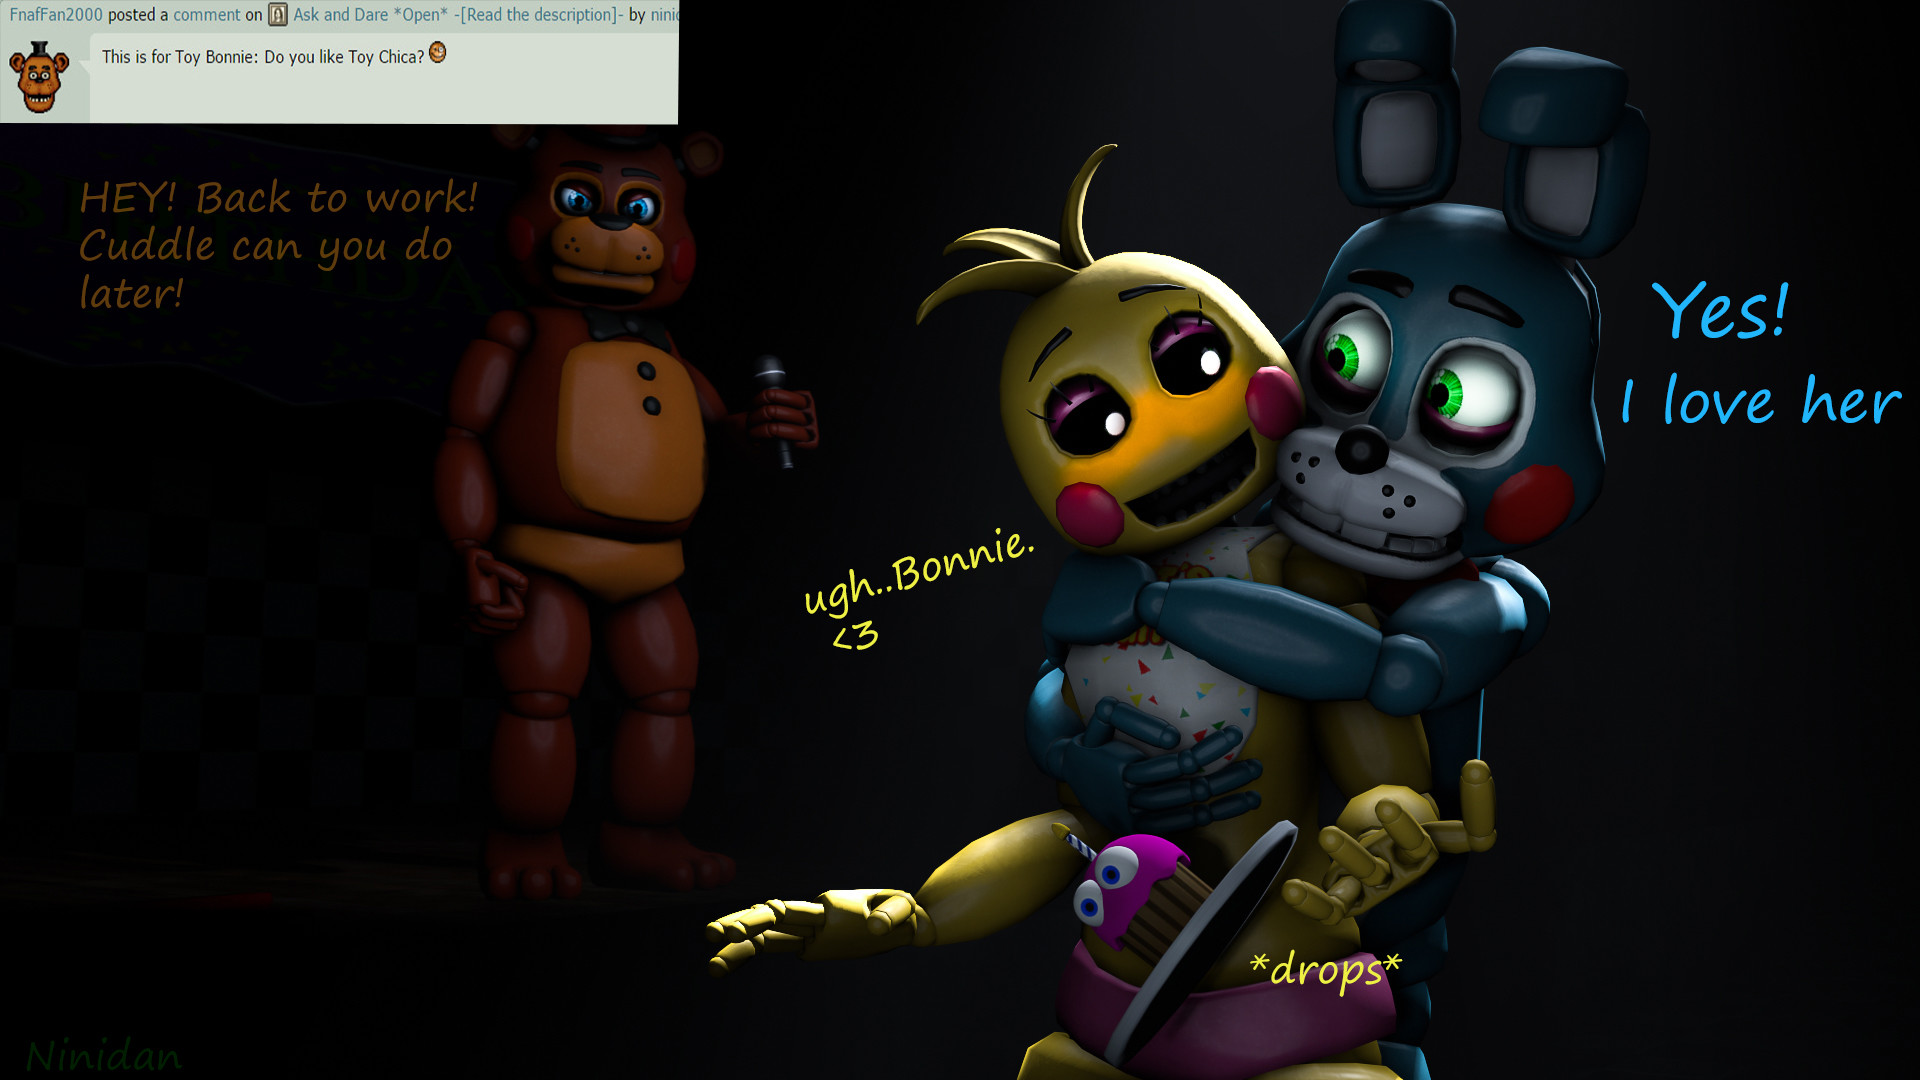 1920x1080 ... Awnser #1 | T-Bonnies feelings for T-Chica [SFM] by